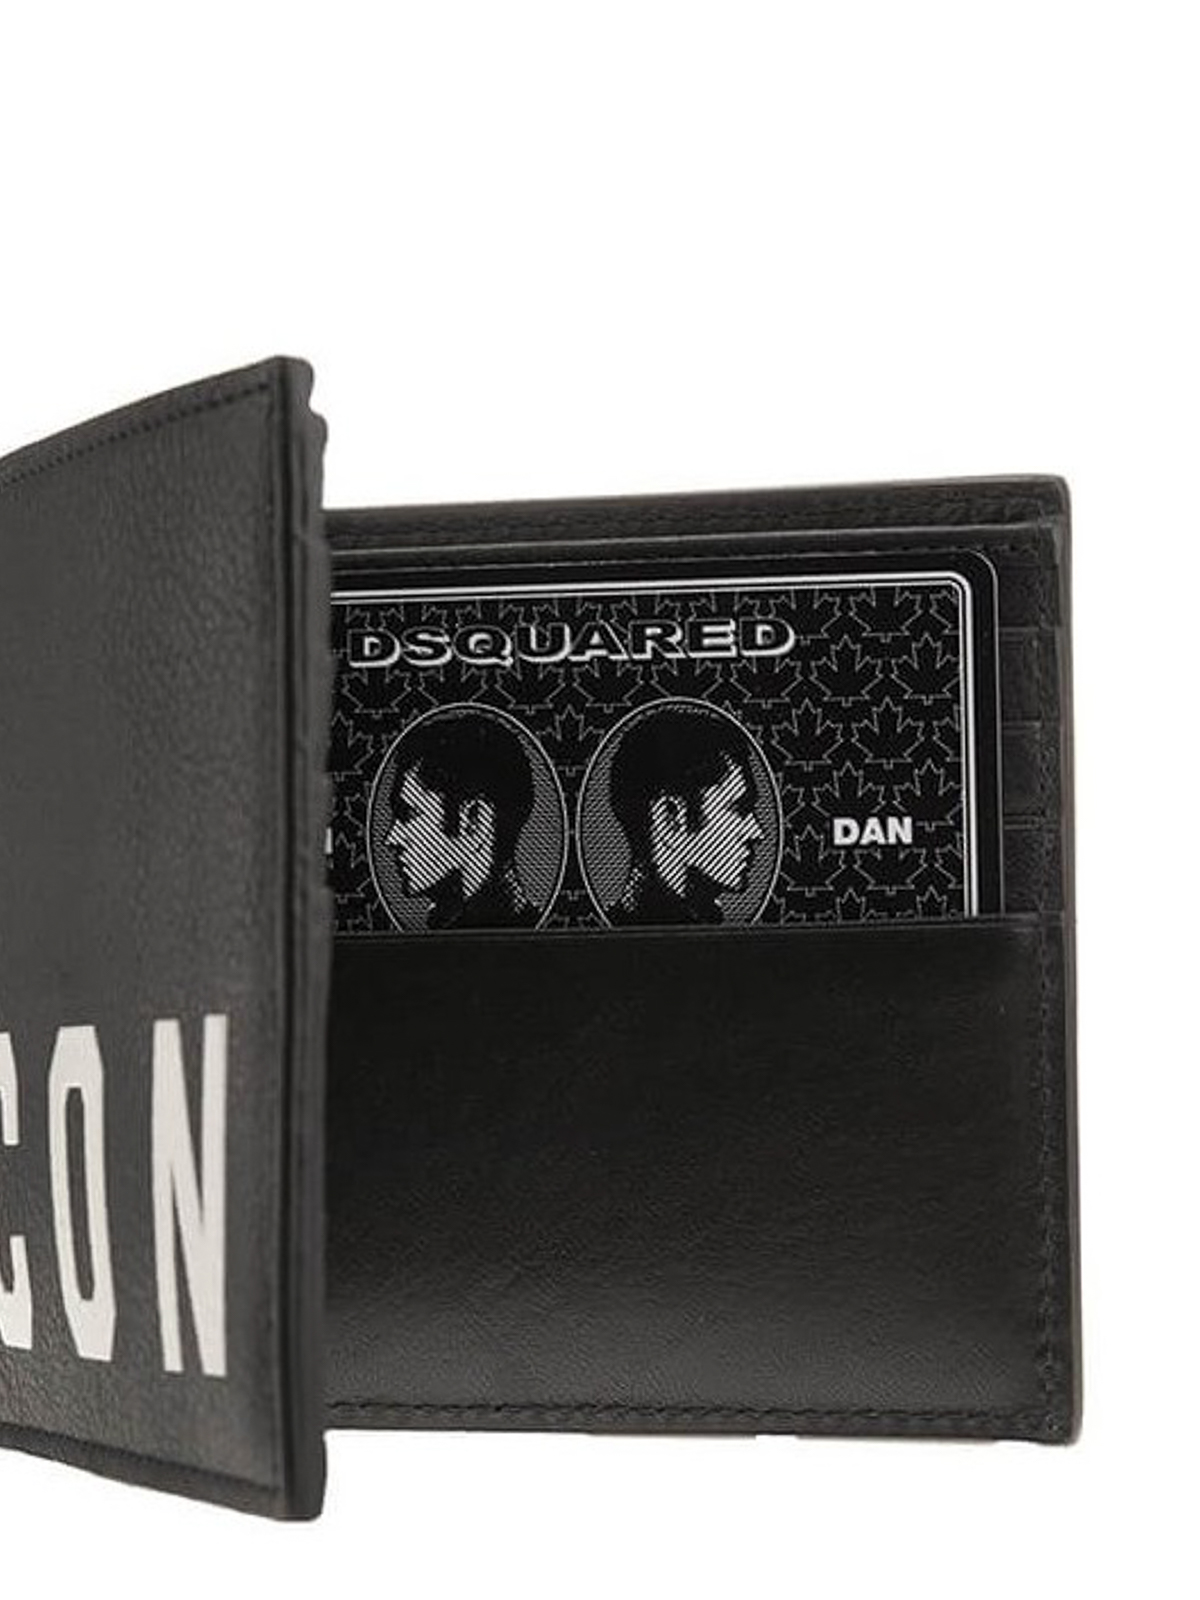 dsquared wallets